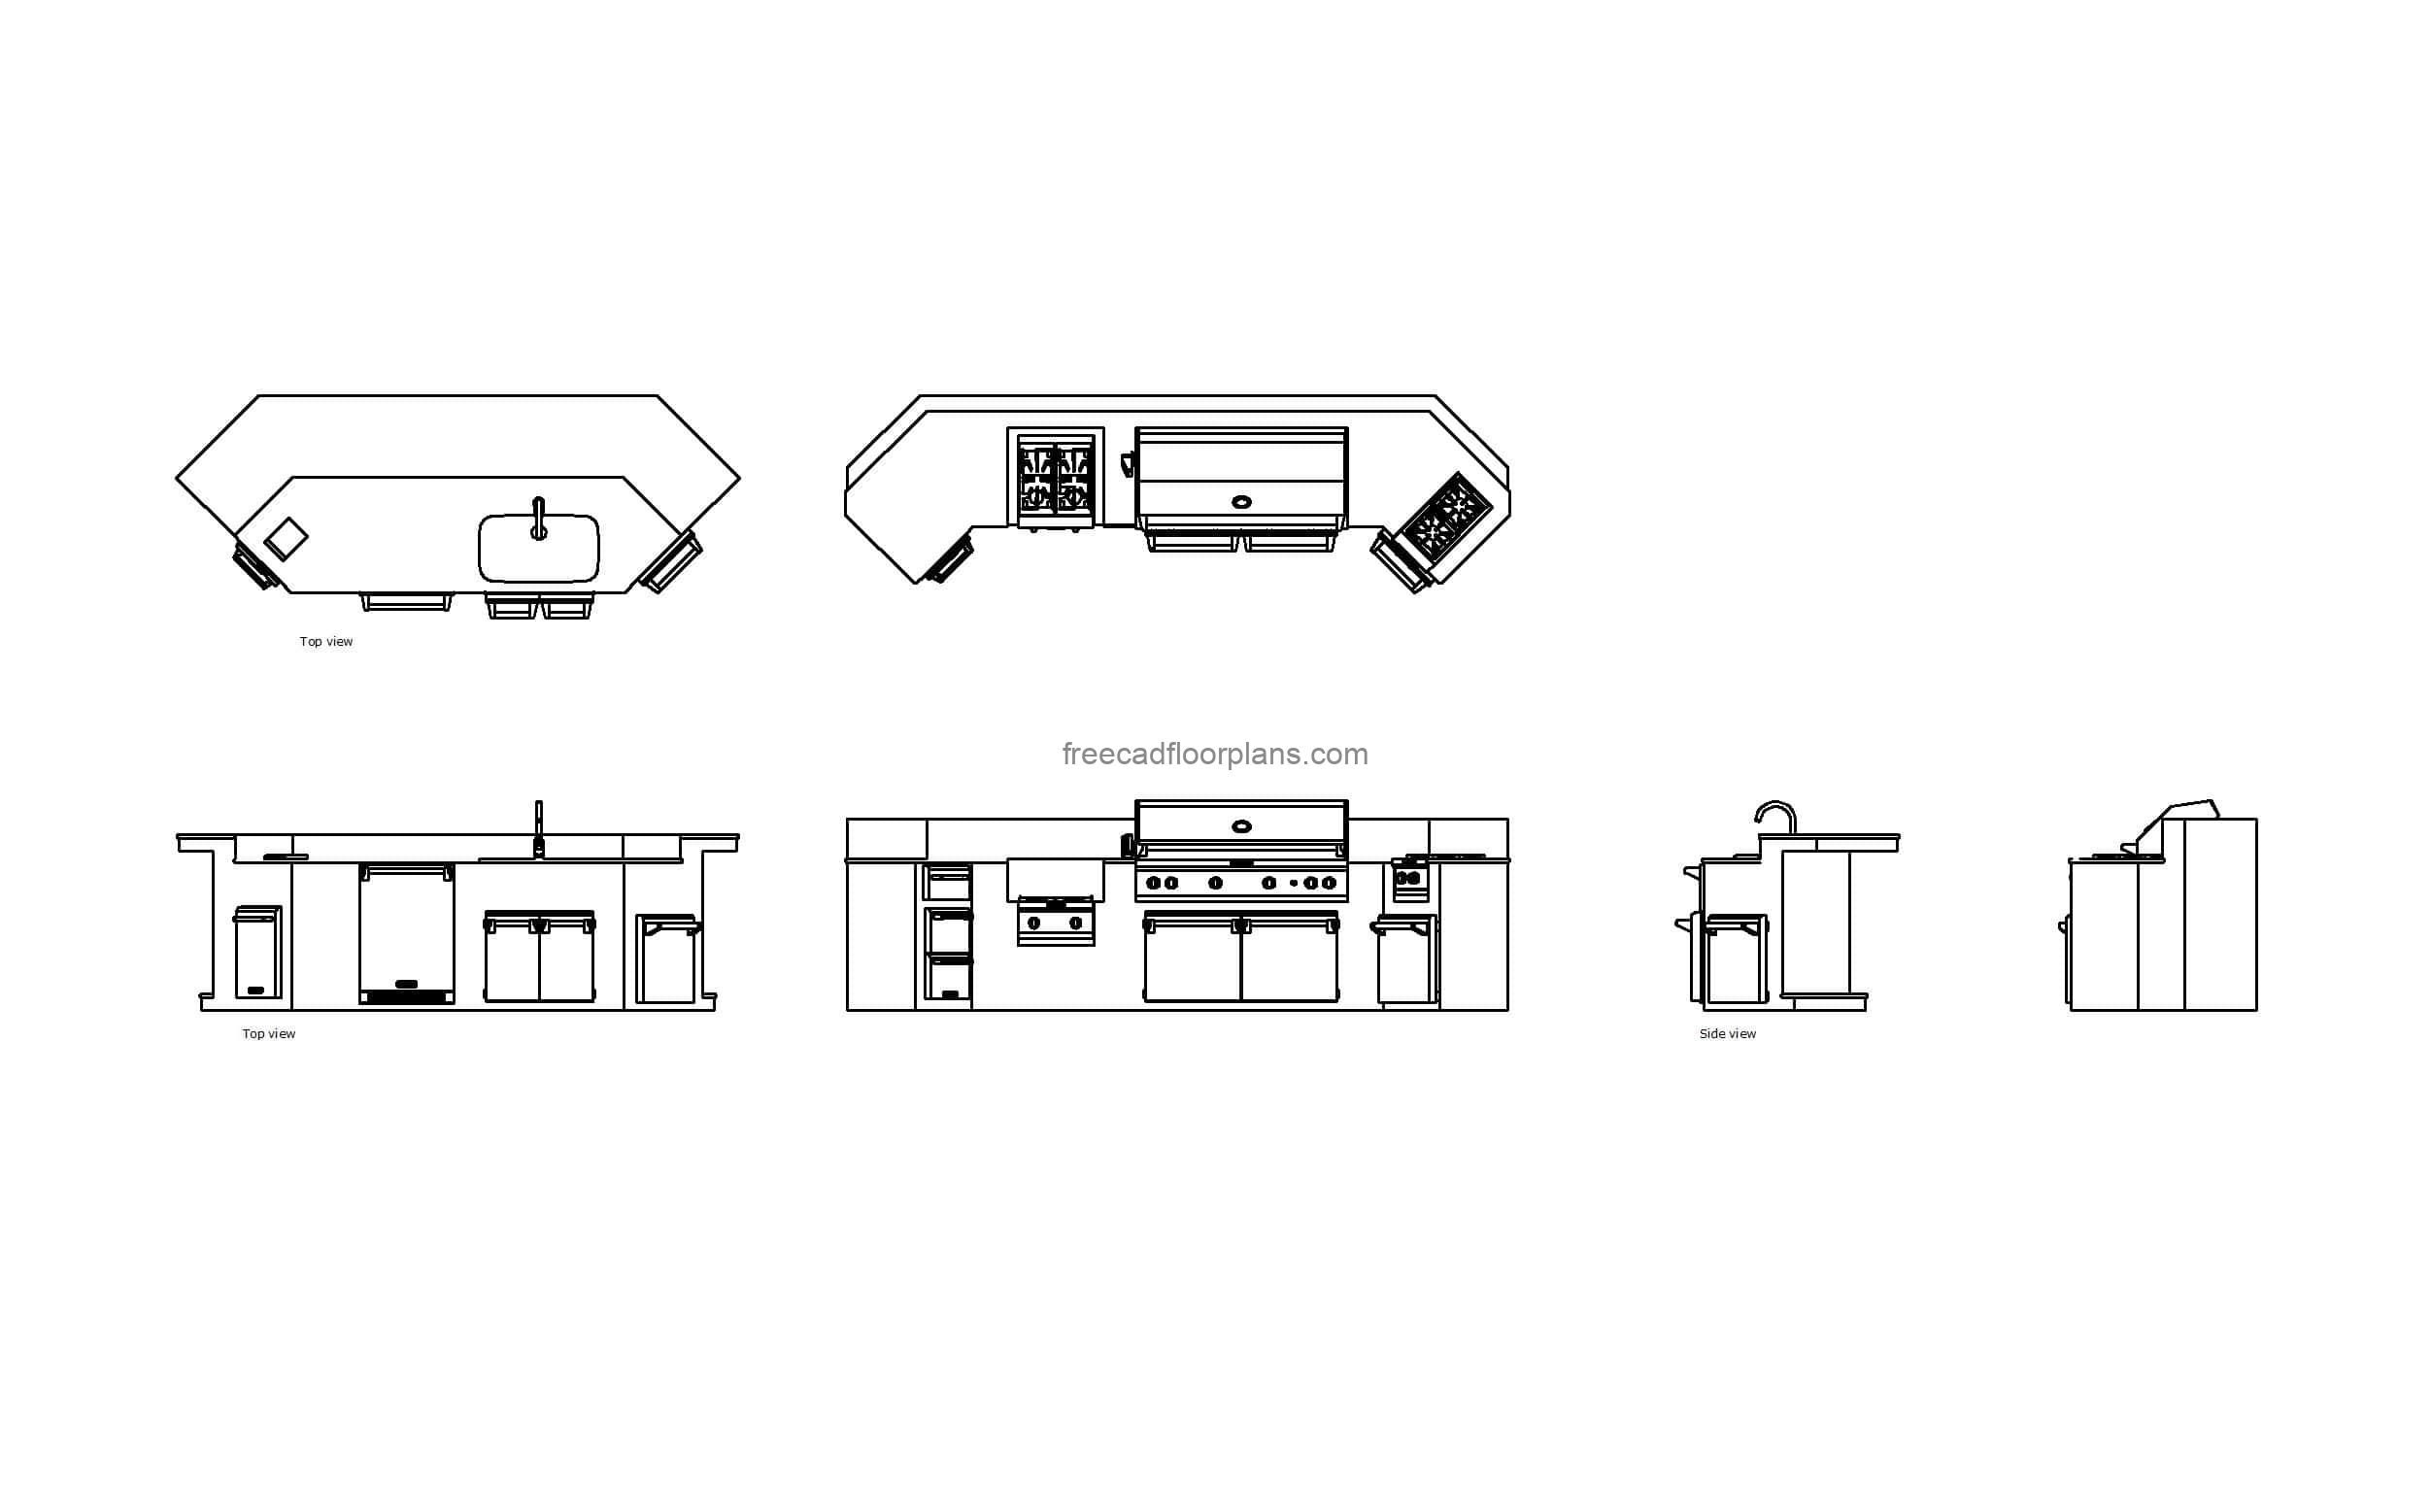 autocad drawing of a kitchenaid outdoor grill, plan and elevation 2d views, dwg file free for download